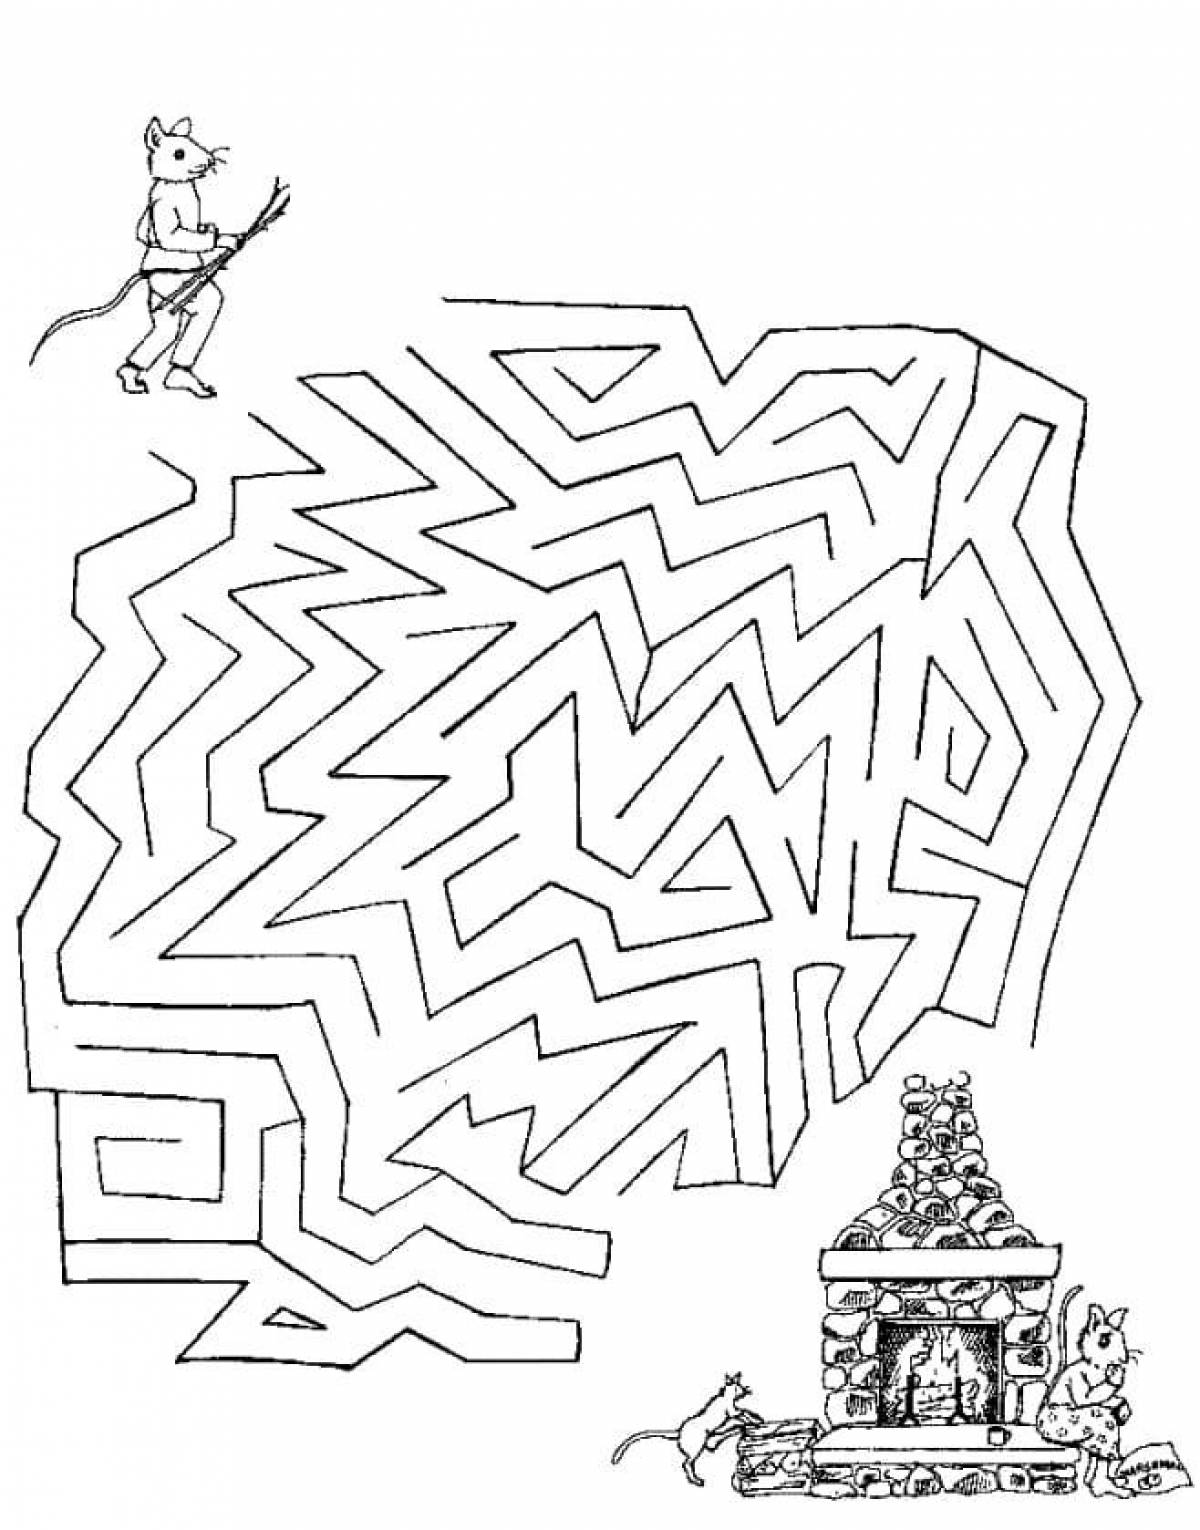 Exquisite maze coloring page